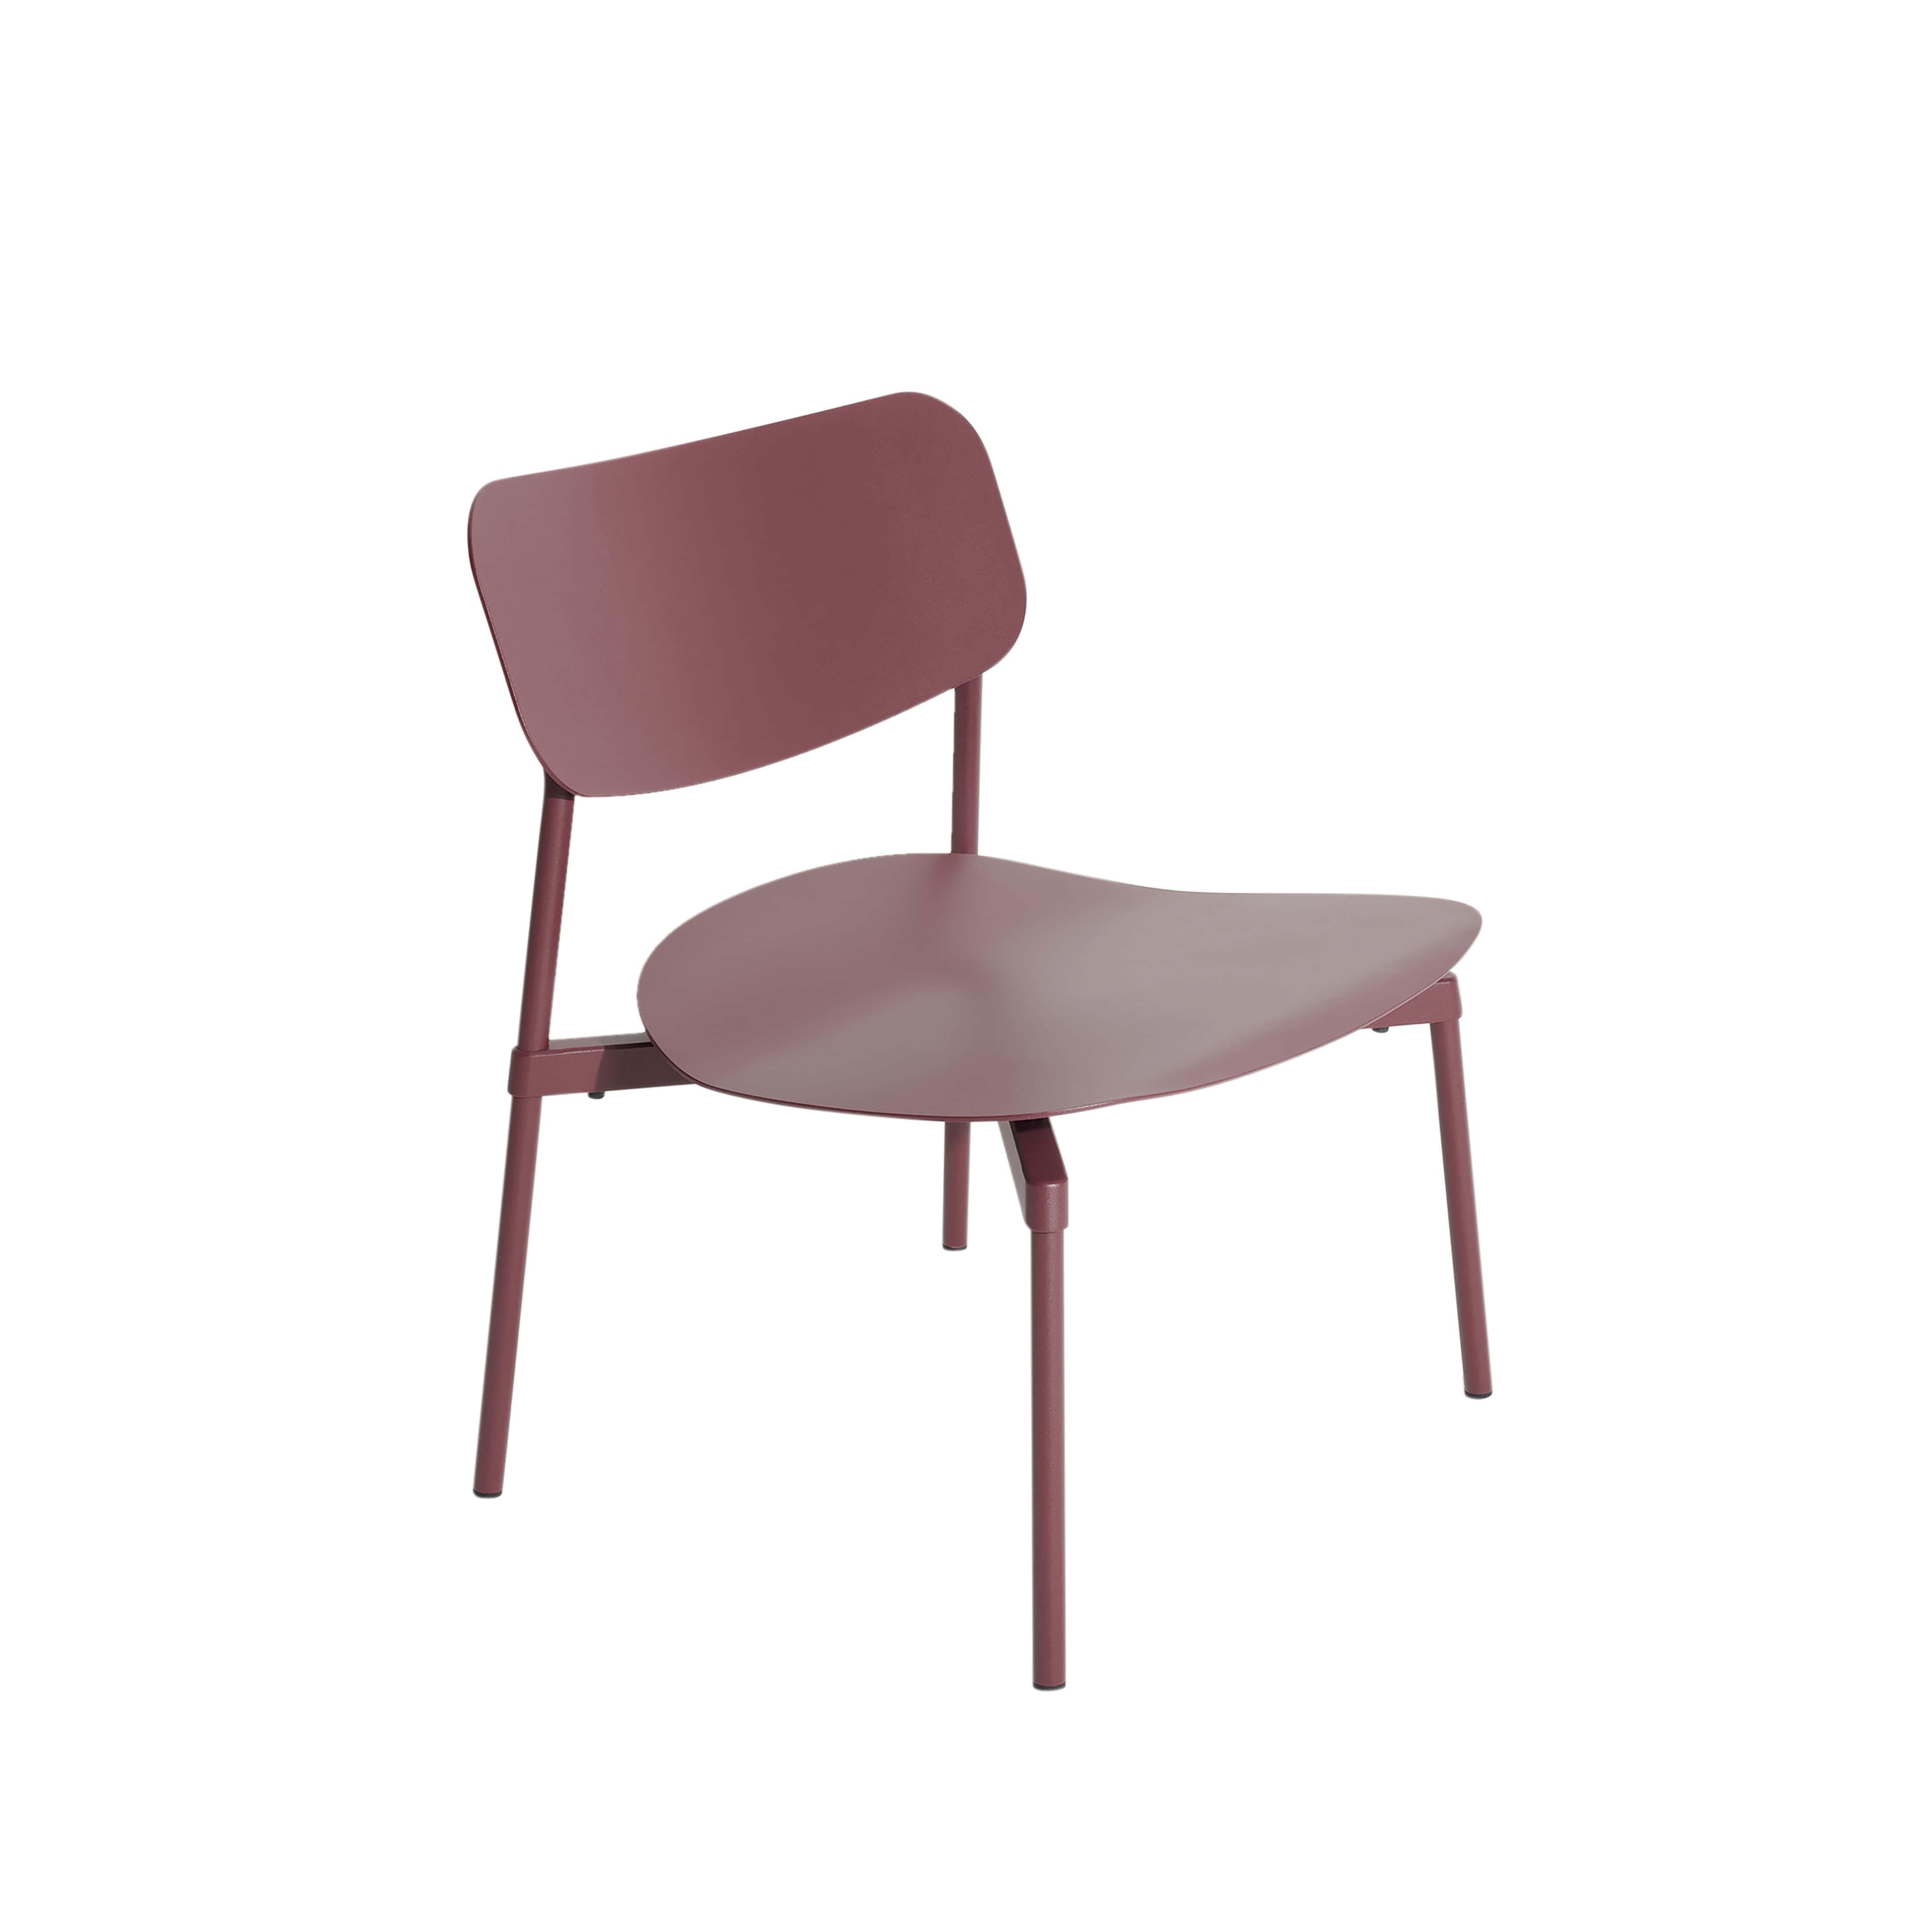 Petite Friture Fromme Lounge Armchair in Brown-red Aluminium by Tom Chung, 2020

The Fromme collection stands out by its pure line and compact design. Absorbers placed under the seating gives a soft and very comfortable flexibility to seats. Made